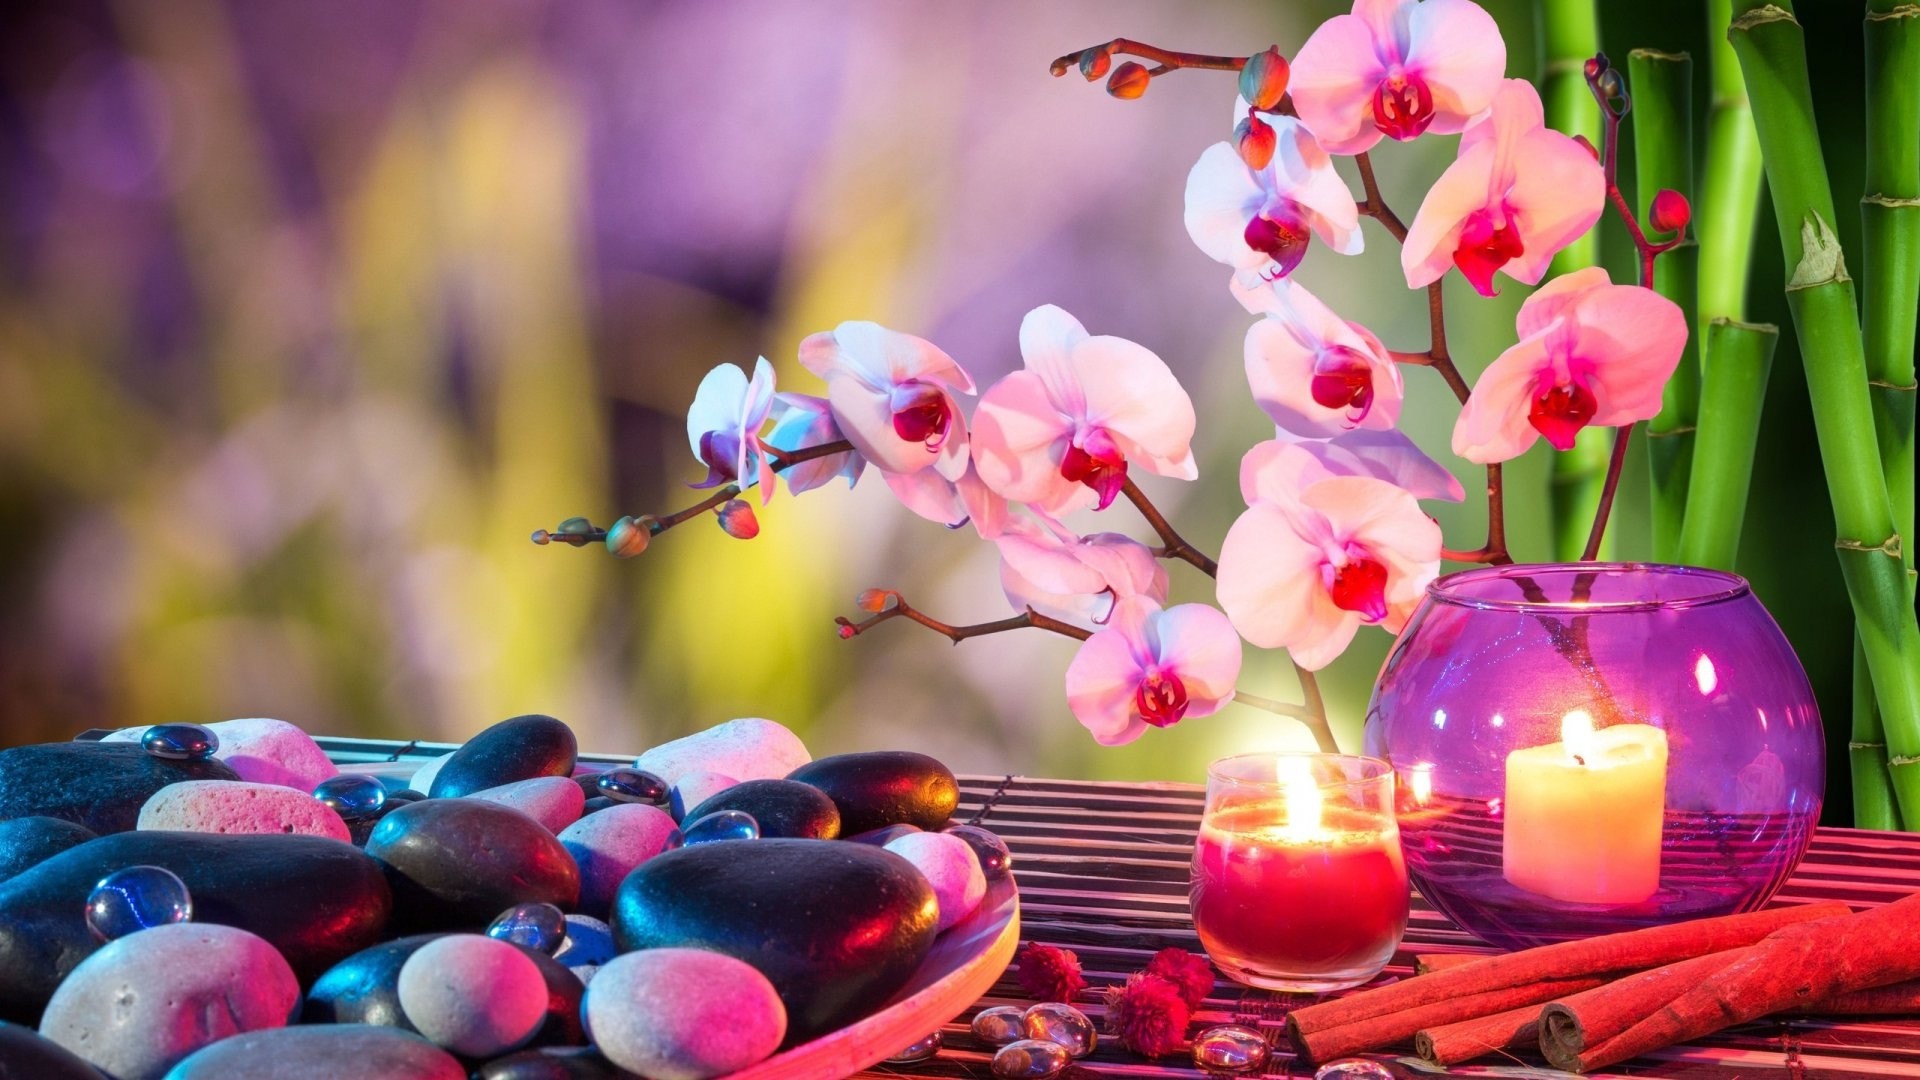 1920x1080 Candle lights stones and flowers nice wallpapers